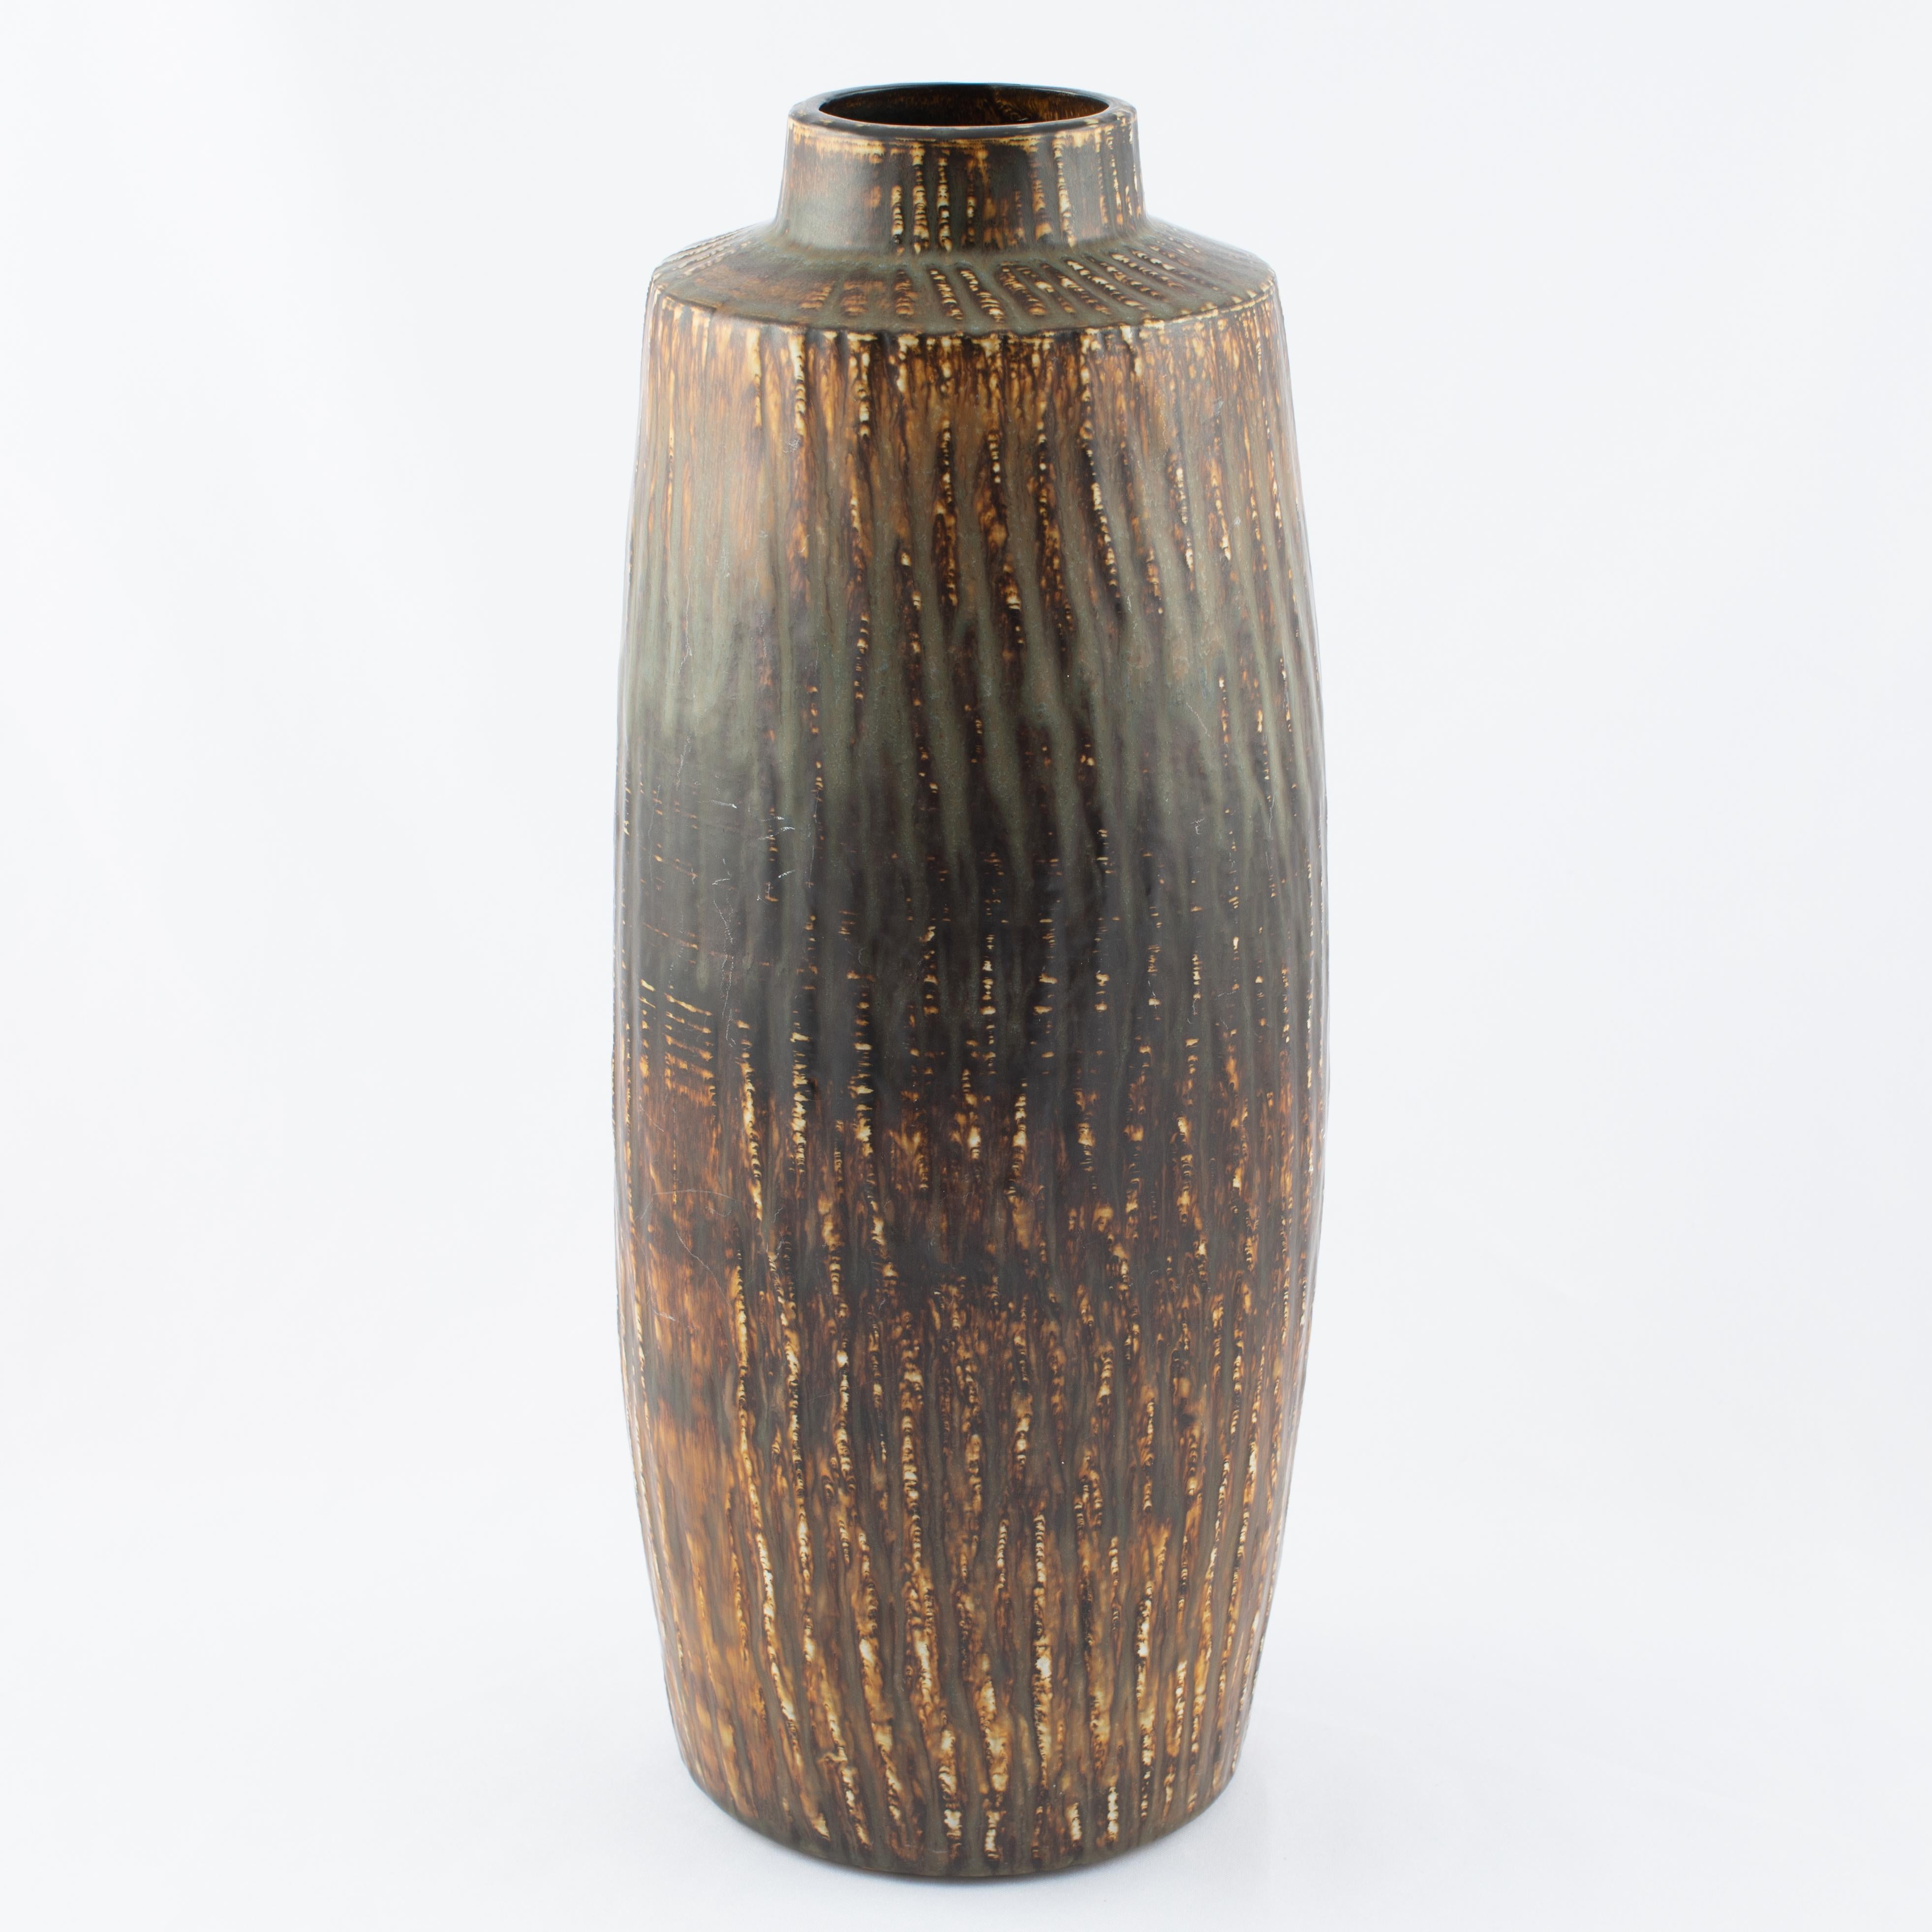 Gunnar Nylund for Rørstrand 'Rubus' Floor Vase, circa 1950s In Good Condition For Sale In Brooklyn, NY